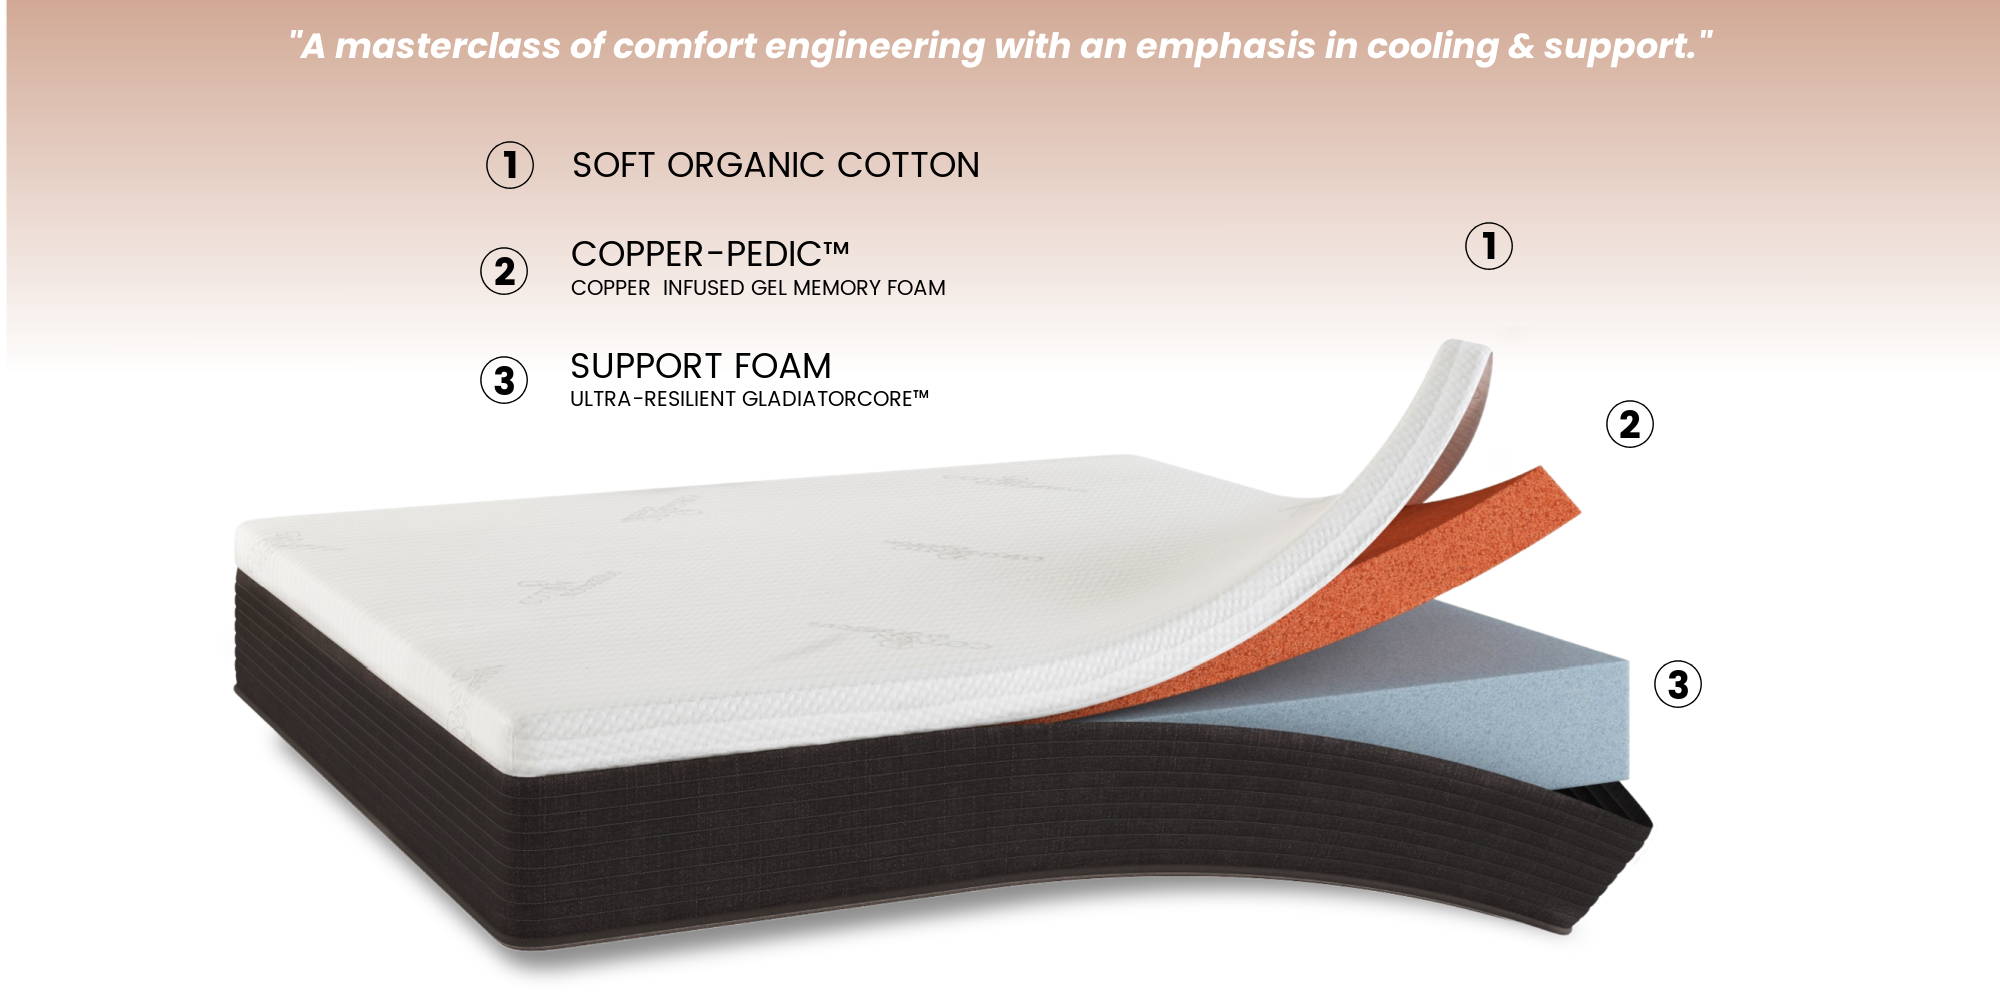 Open mattress with layers showing: soft organic cotton fabric, copper-infused cooling memory foam, breathable support foam made from plant-based GladiatorCore foam.